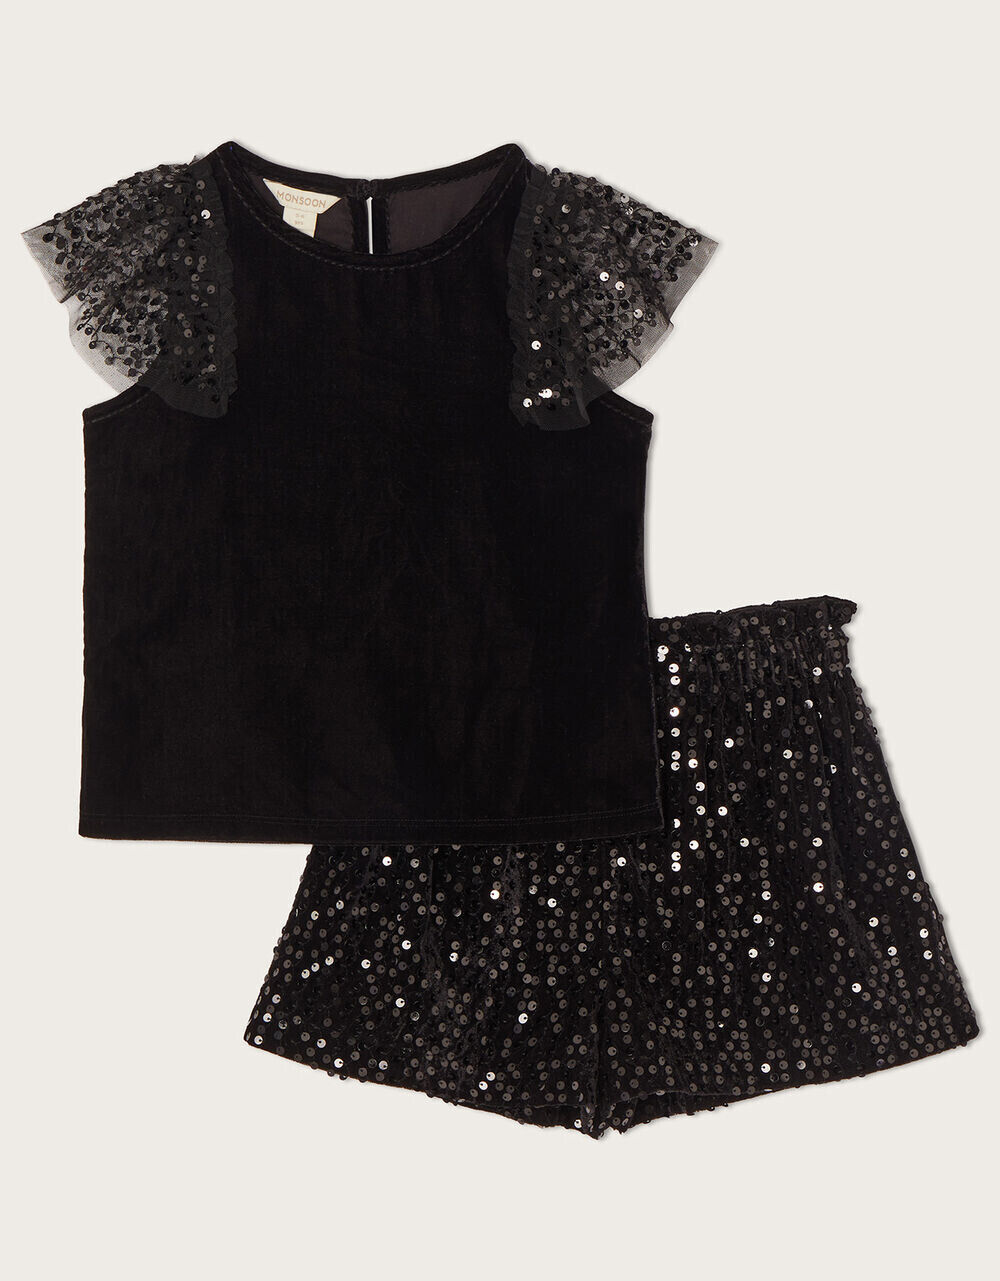 Monsoon Girls Party Black Sequin Shorts Size 7-8 Years